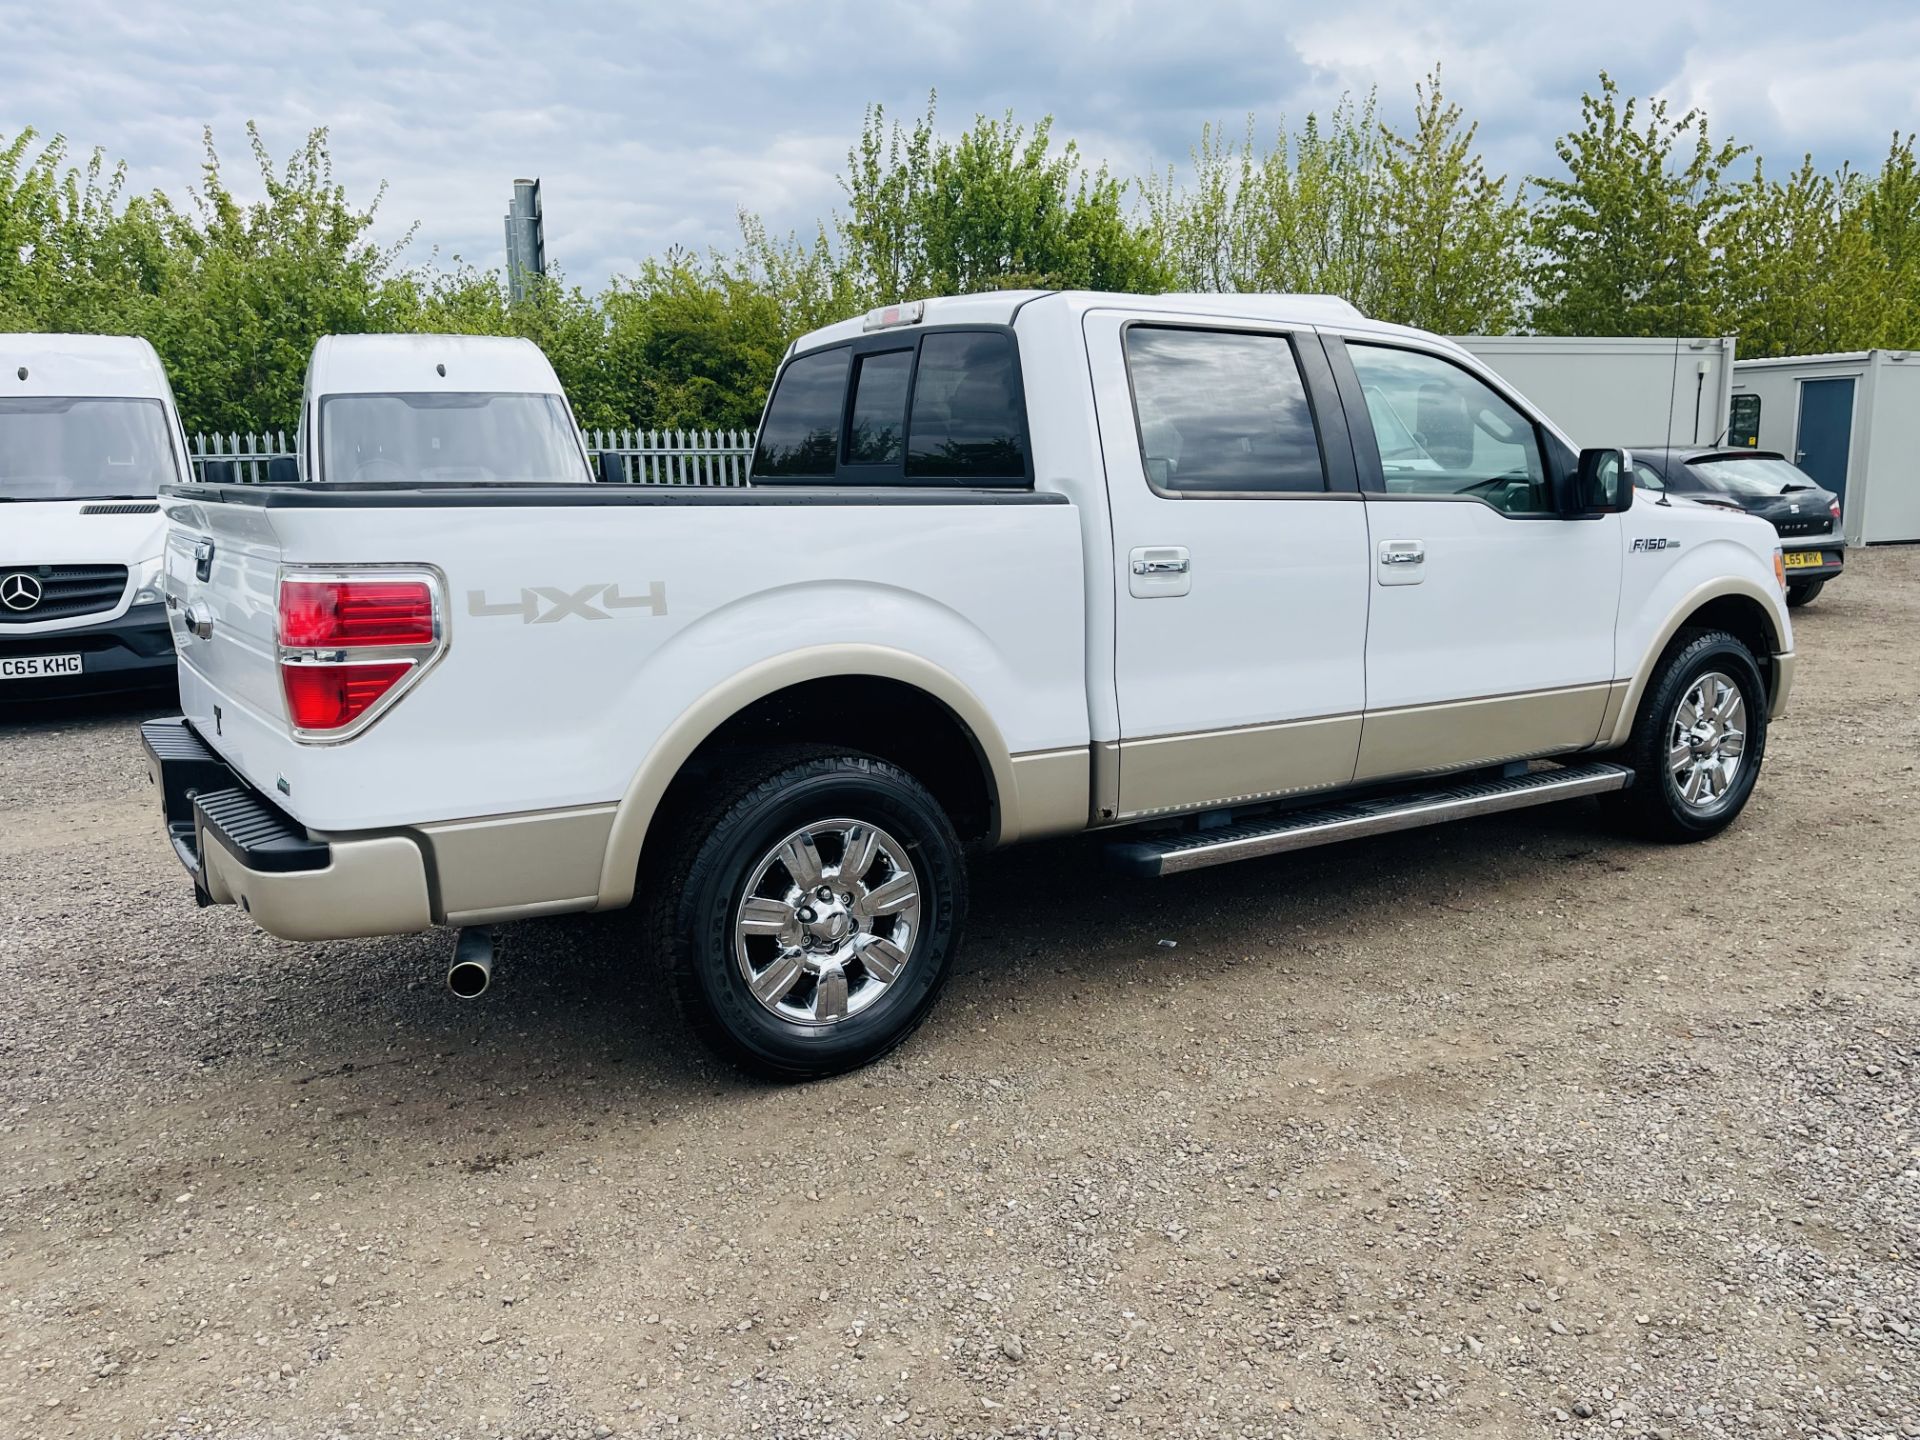 ** ON SALE ** Ford F-150 5.4L V8 Lariat Supercrew 4WD ' 2010 Year' A/C - Full Spec - ULEZ Compliant - Image 12 of 29